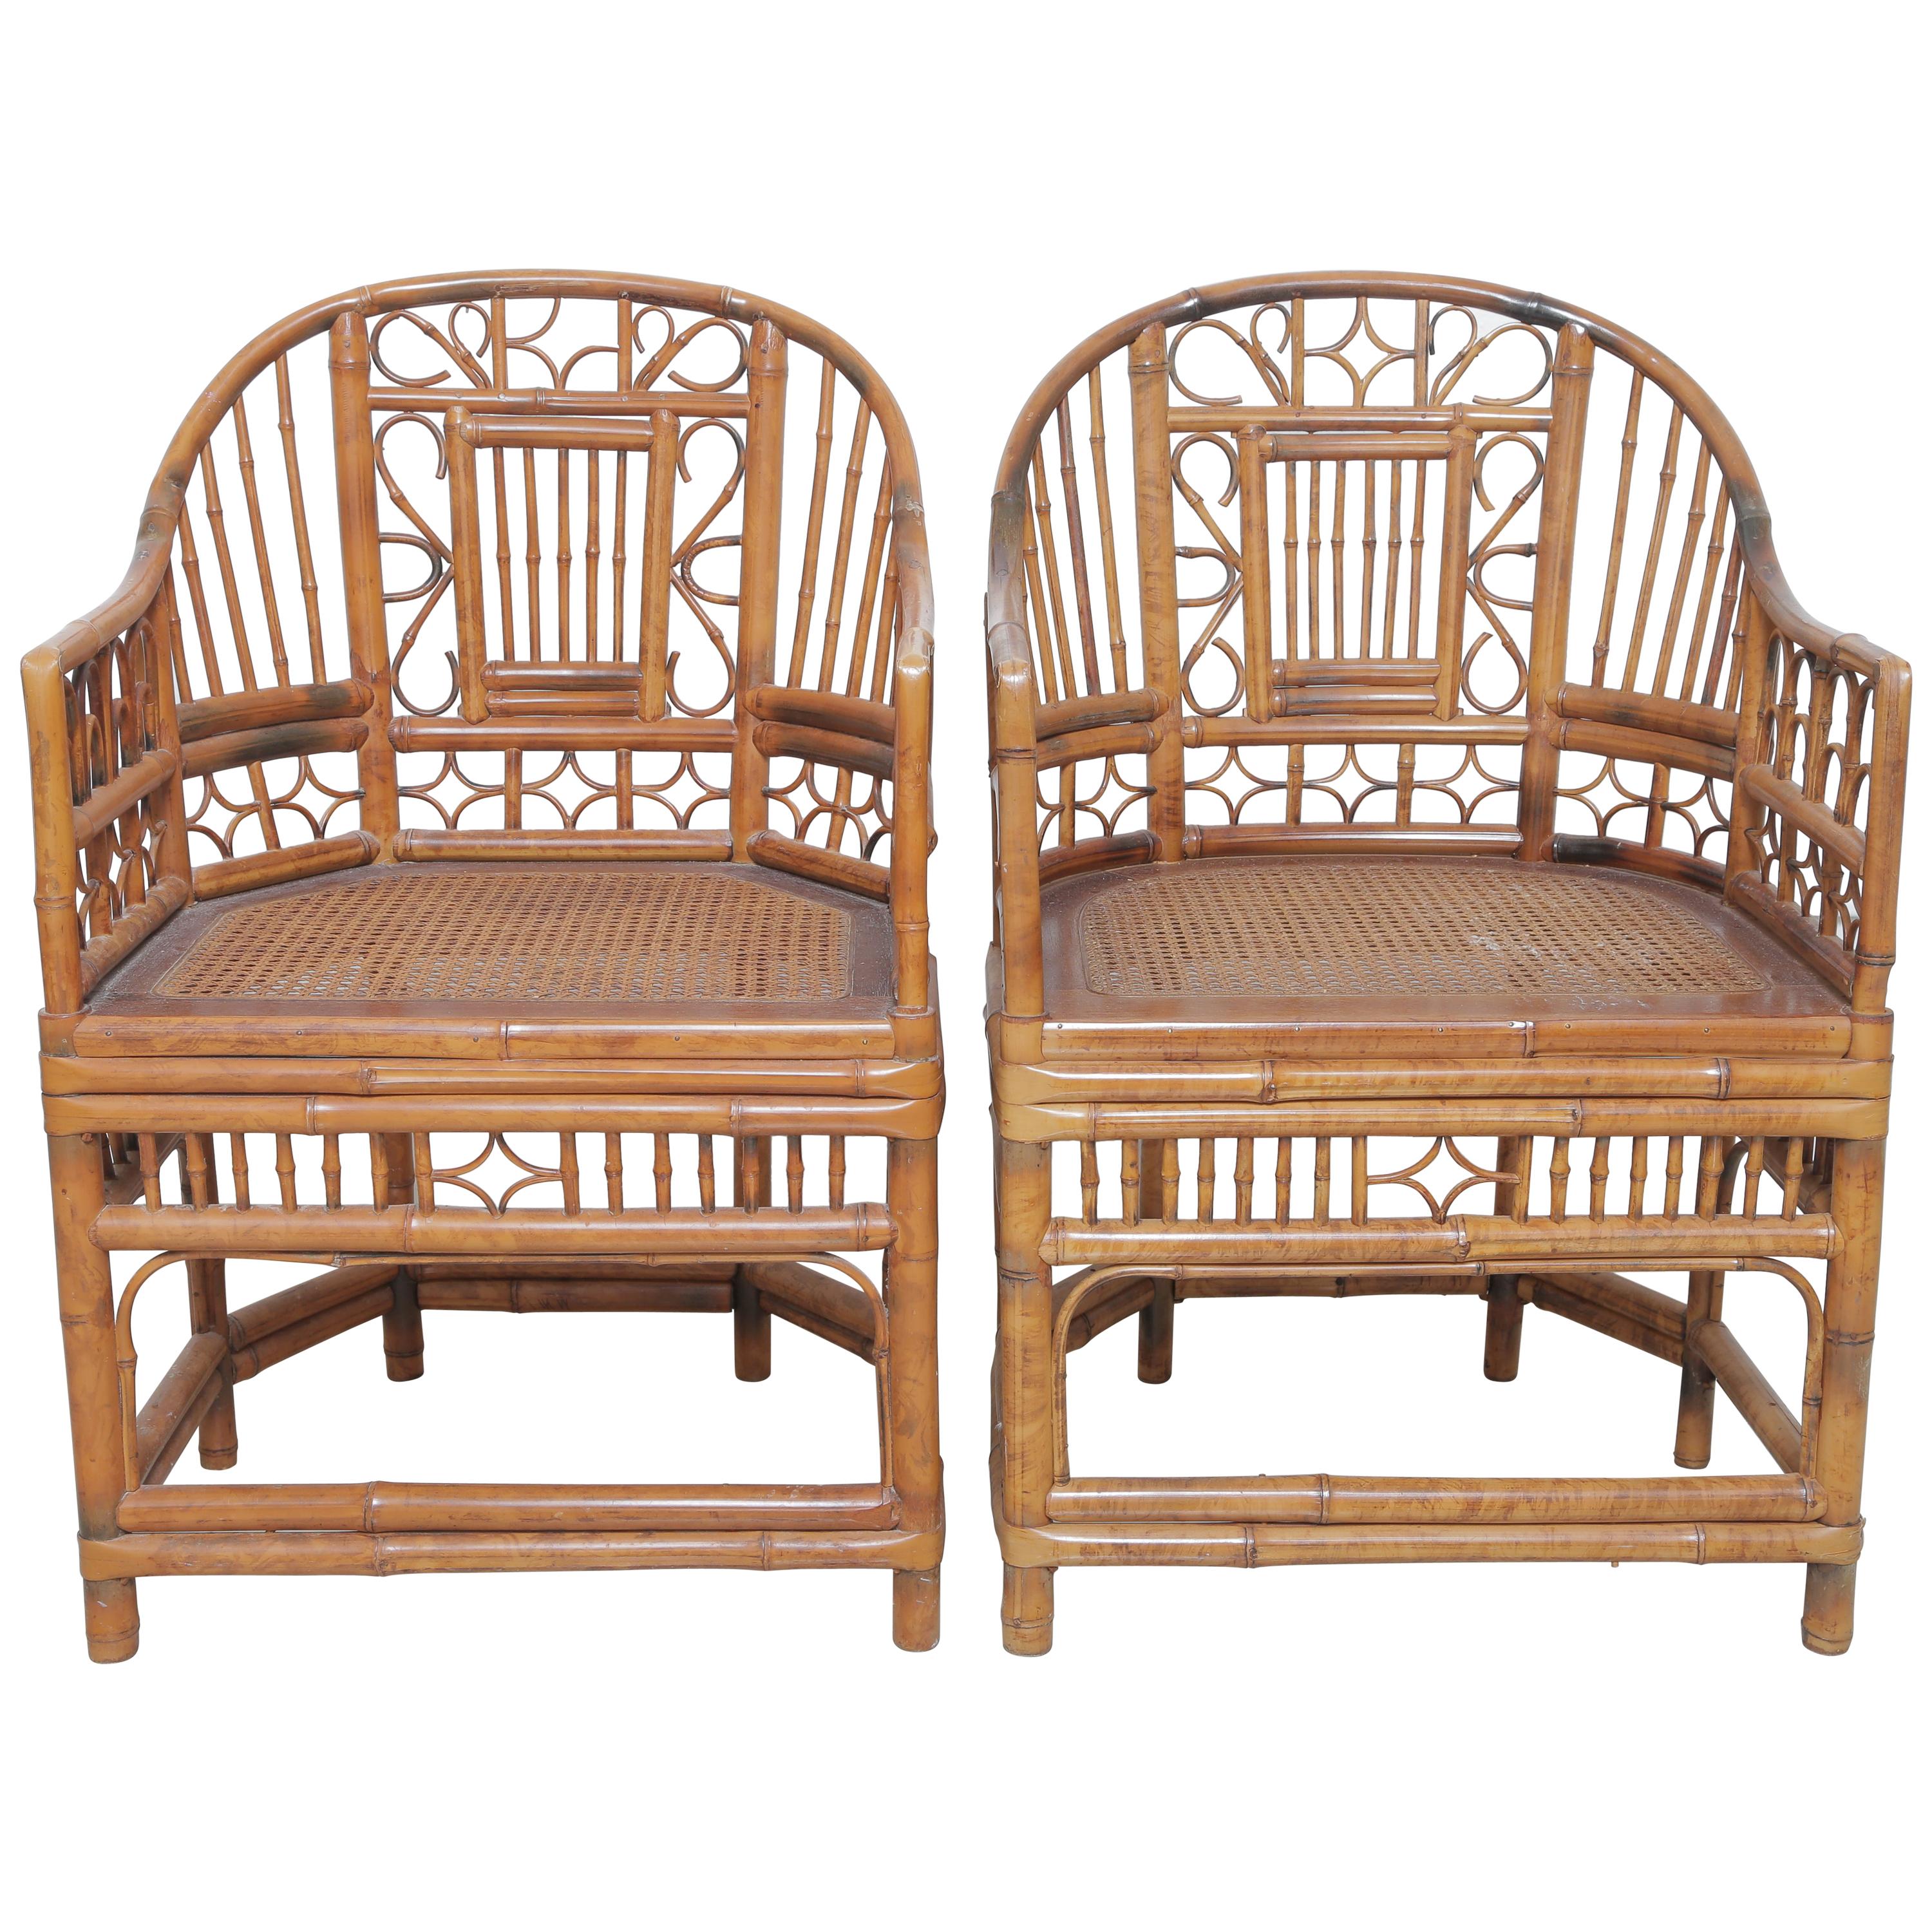 Beautiful Pair of Vintage English Regency Bamboo Chairs